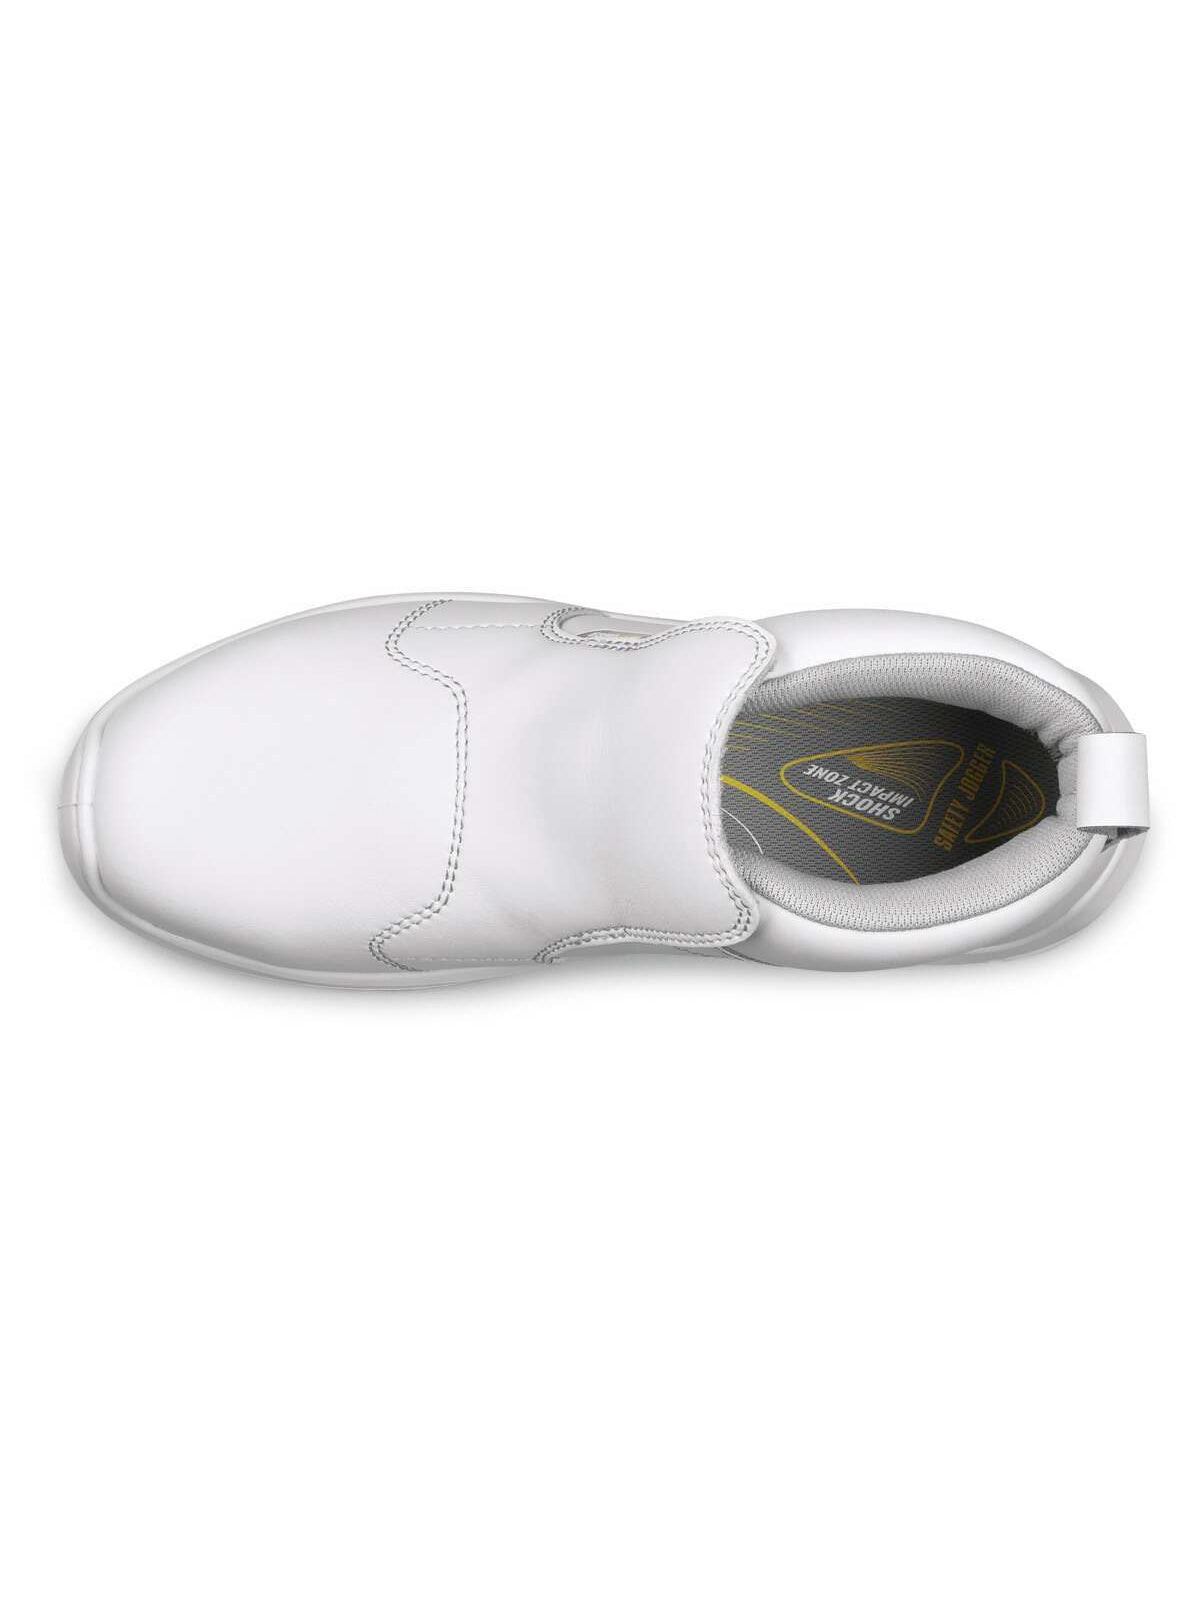 Unisex Safety Shoe Lungo81 (S3) by Safety Jogger -  ChefsCotton